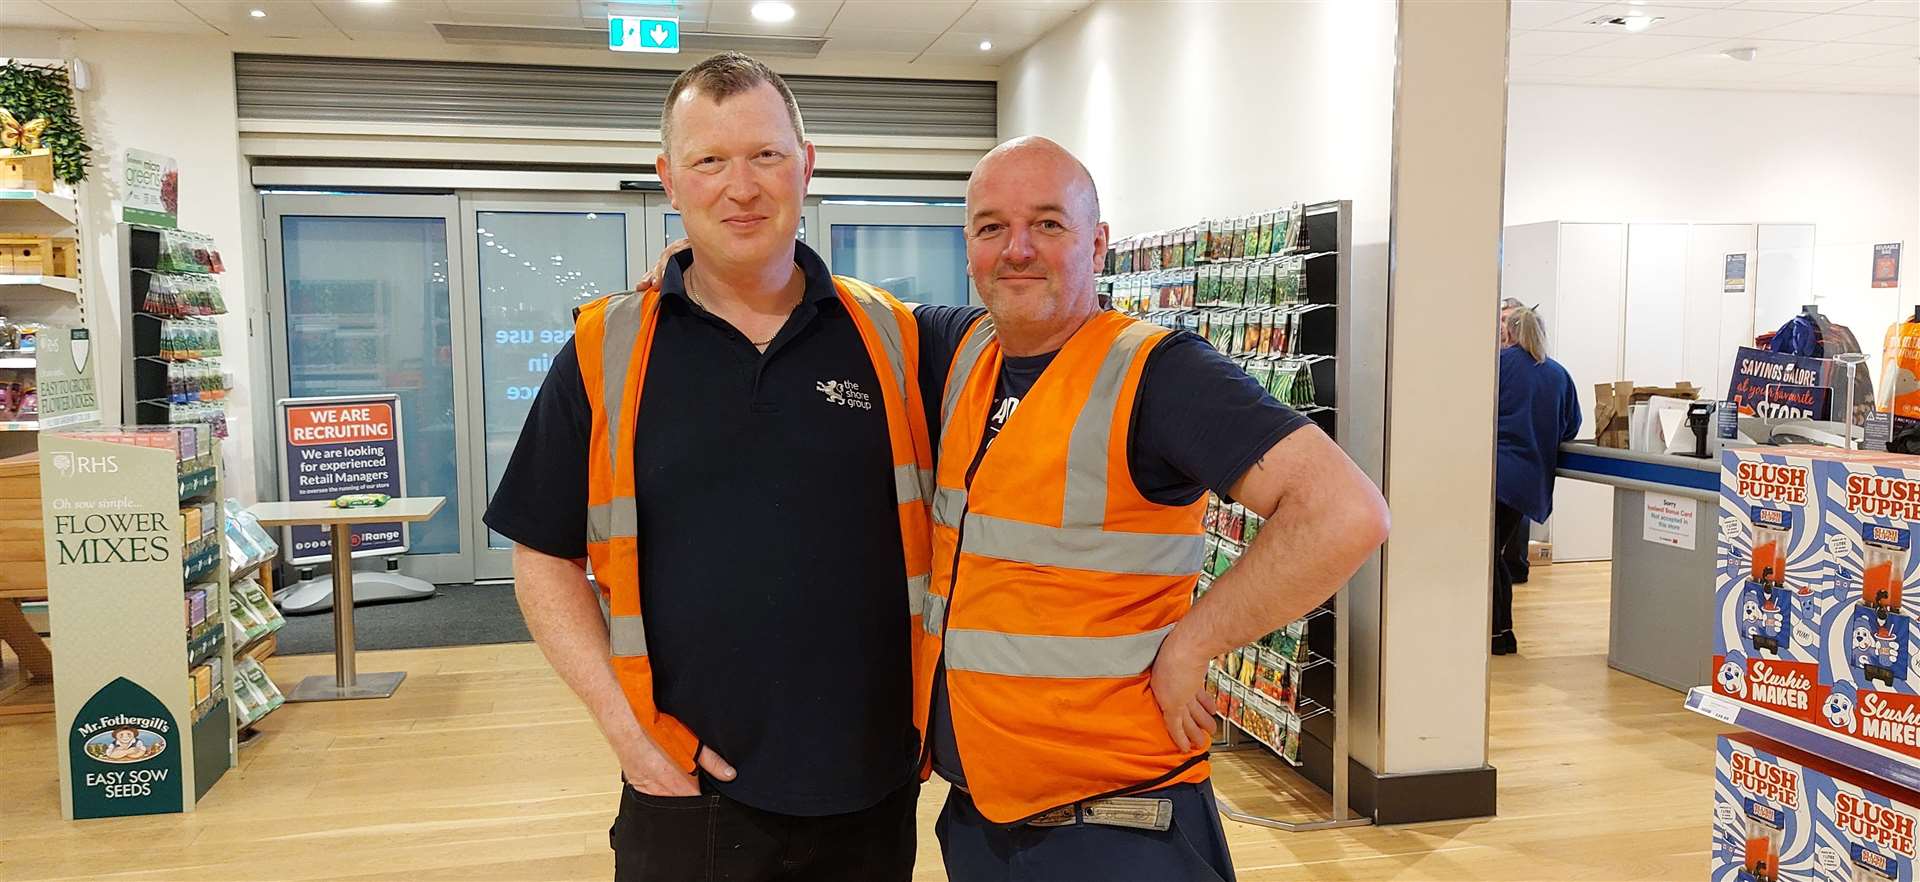 Damien Mooney and Dave King from The Shore Group have been working tirelessly to get the store ready